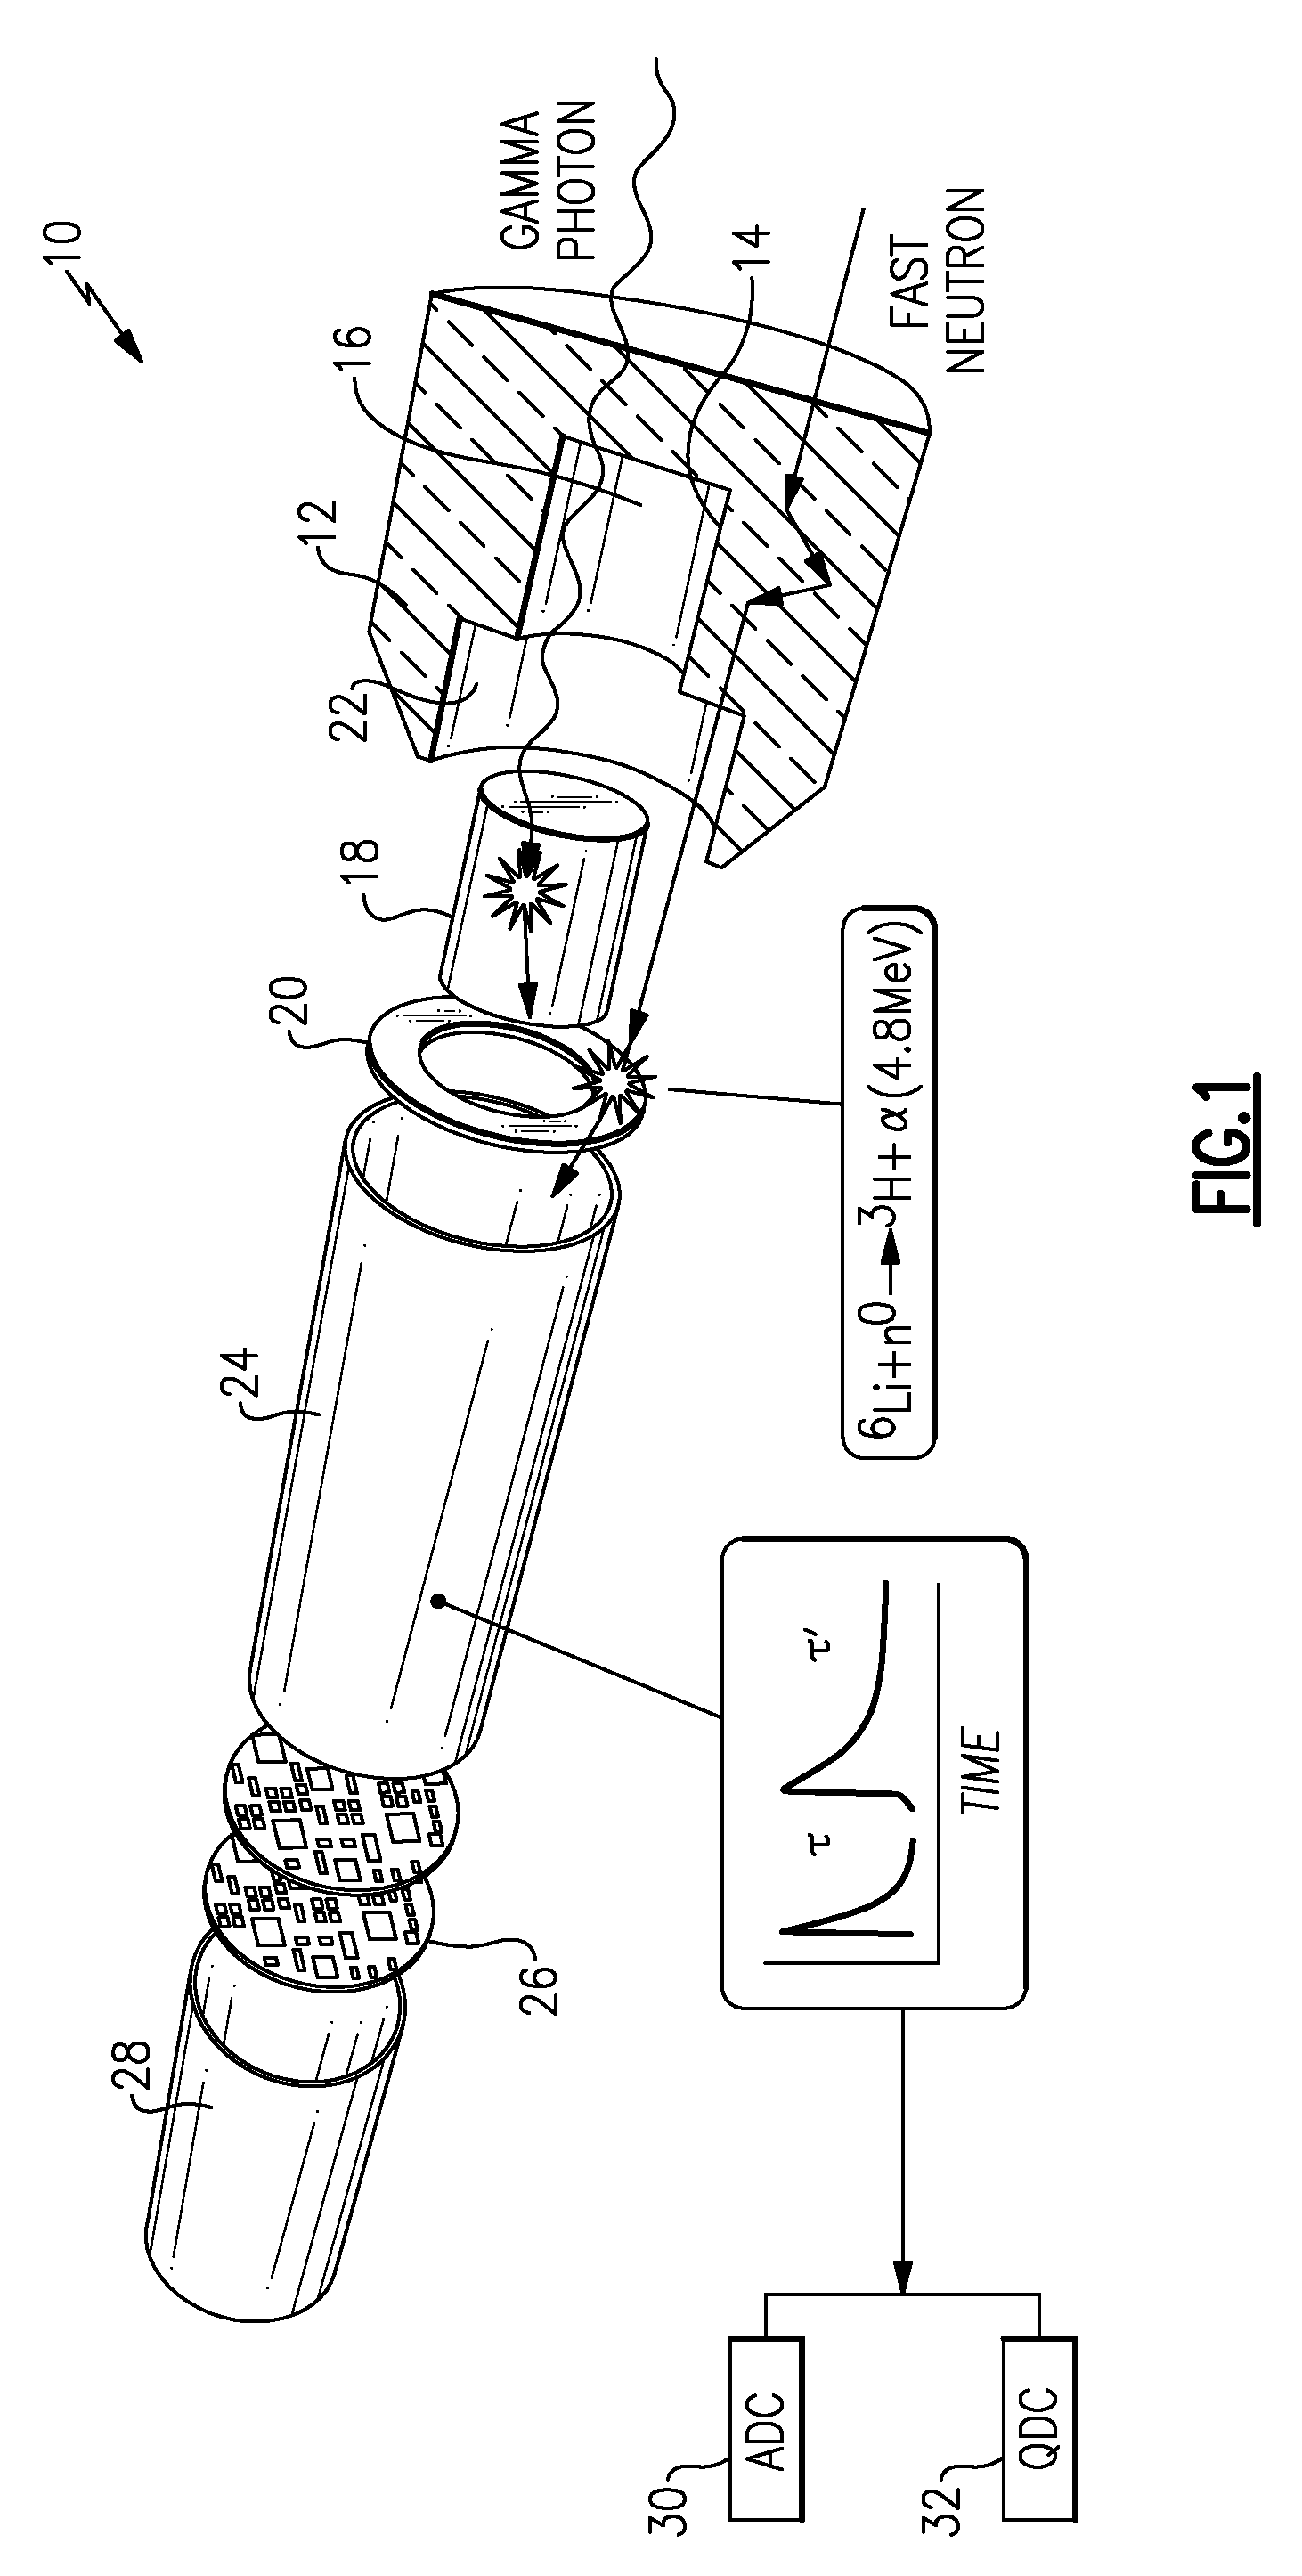 Integrated neutron-gamma radiation detector with adaptively selected gamma threshold